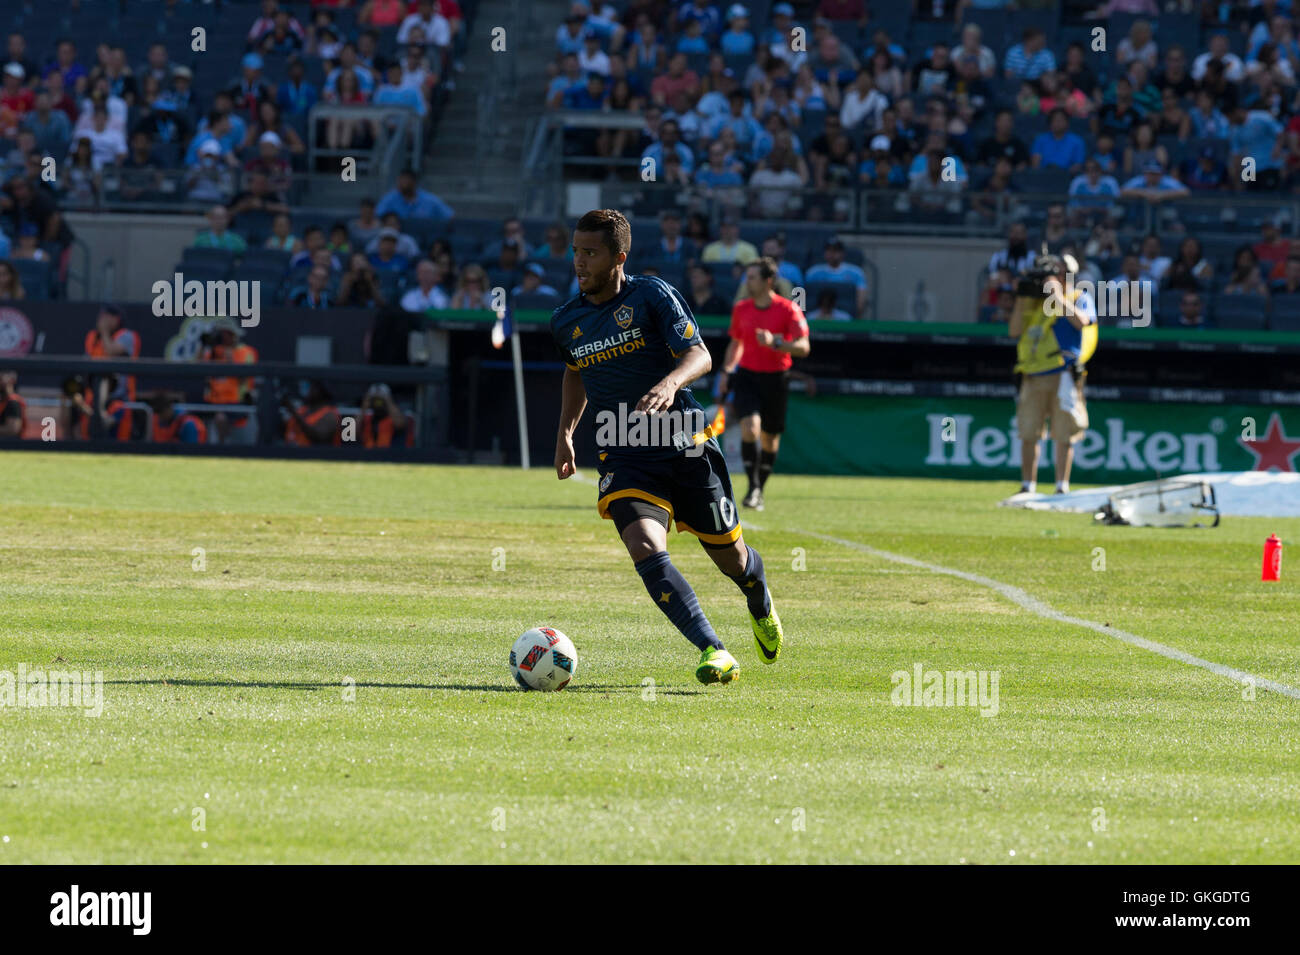 New York, NY USA - August 20, 2016: Giovani dos Santos (10) of LA Galaxy controls ball during MLS match against NYC FC on Yankees stadium Credit:  lev radin/Alamy Live News Stock Photo